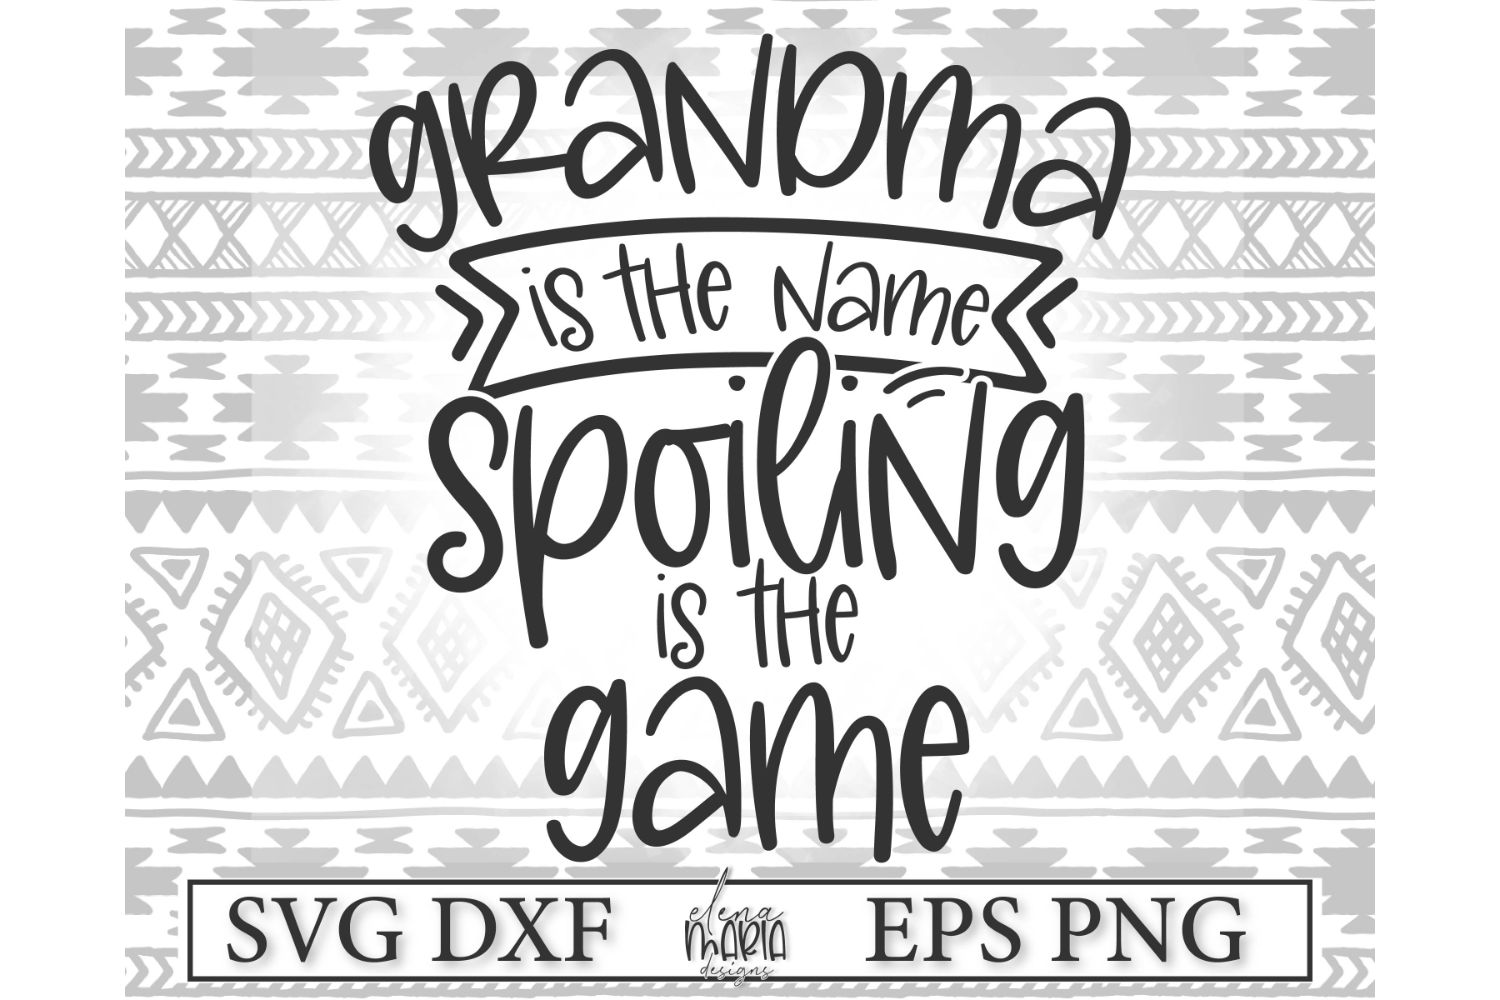 Download Grandma is the name spoiling is the game SVG File